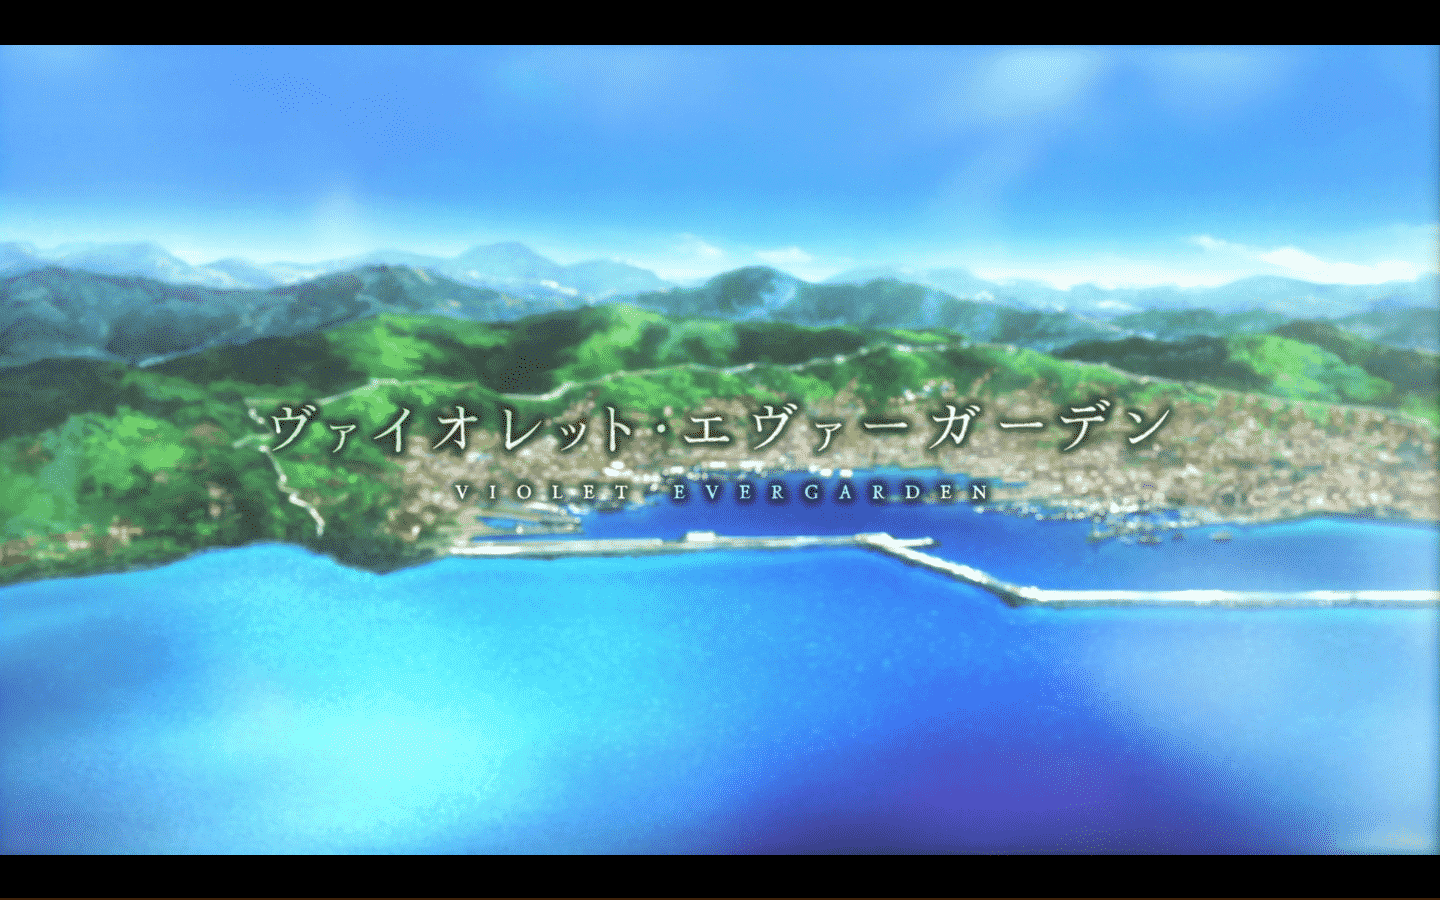 The title card for Violet Evergarden